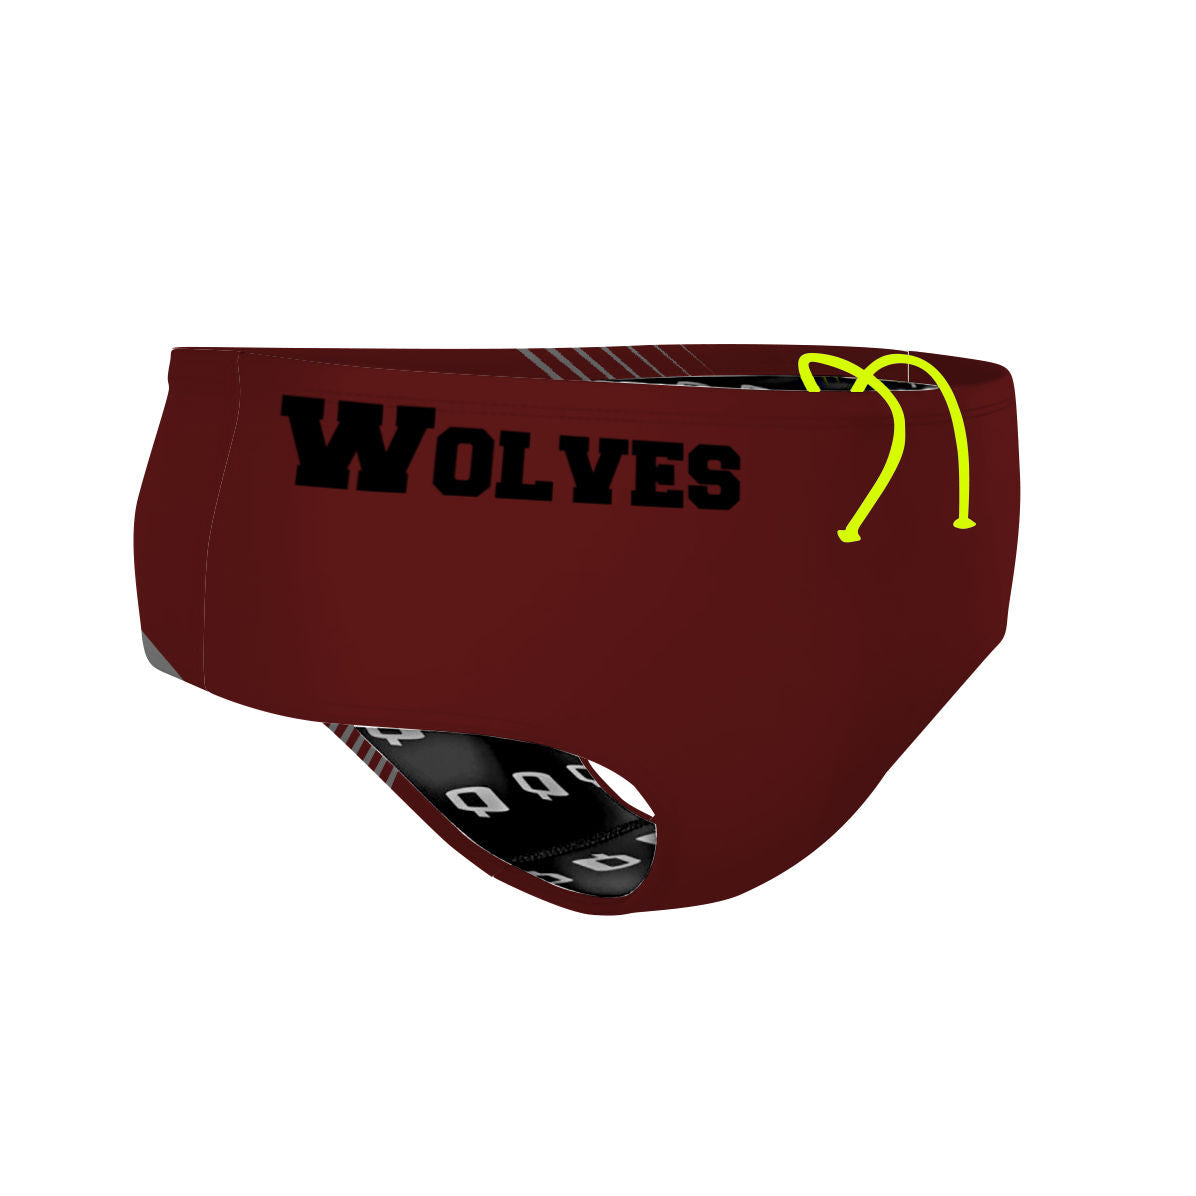 SK Wolves - Classic Brief